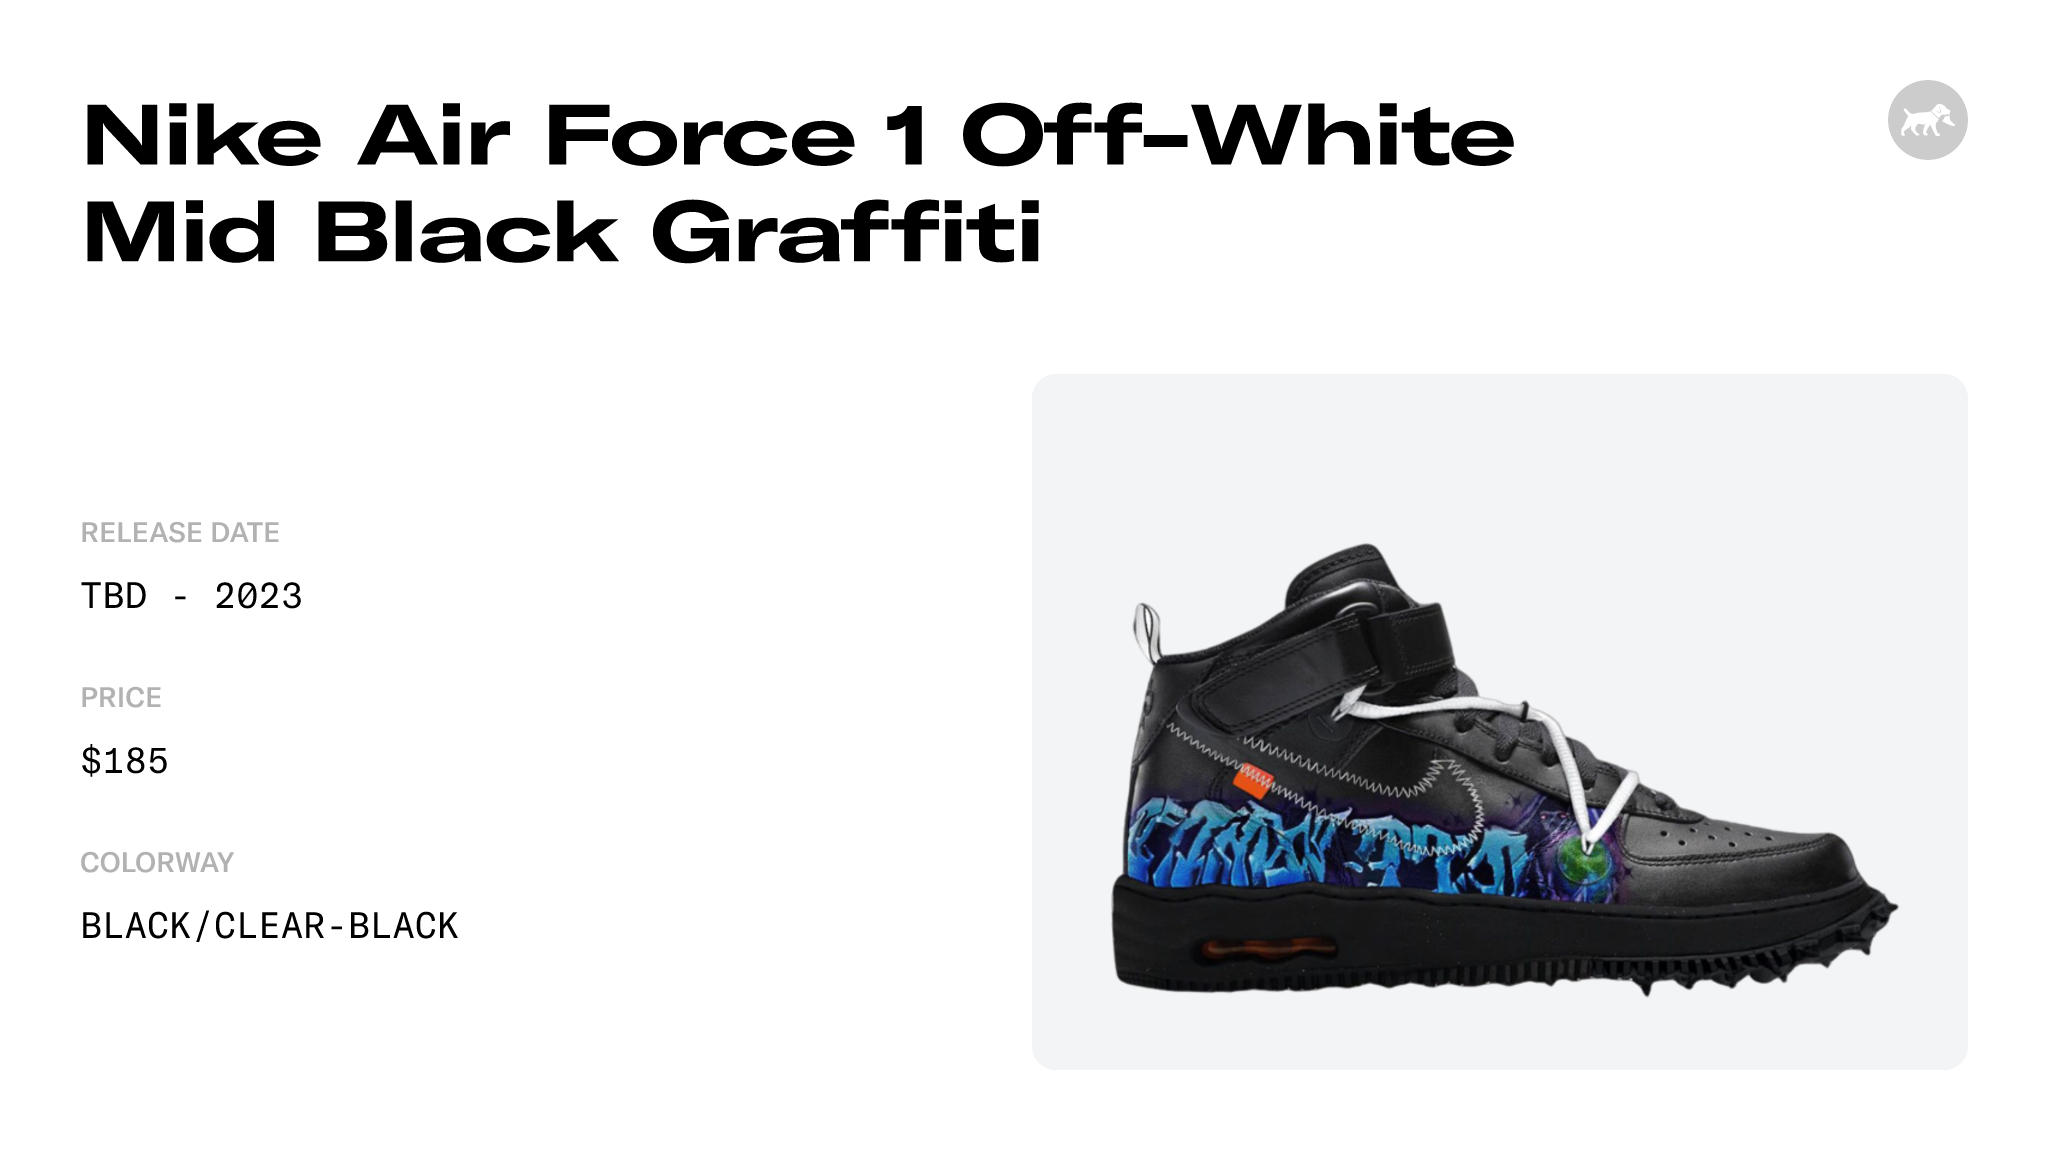 The Off-White x Nike Air Force 1 Mid “Graffiti” Just Dropped